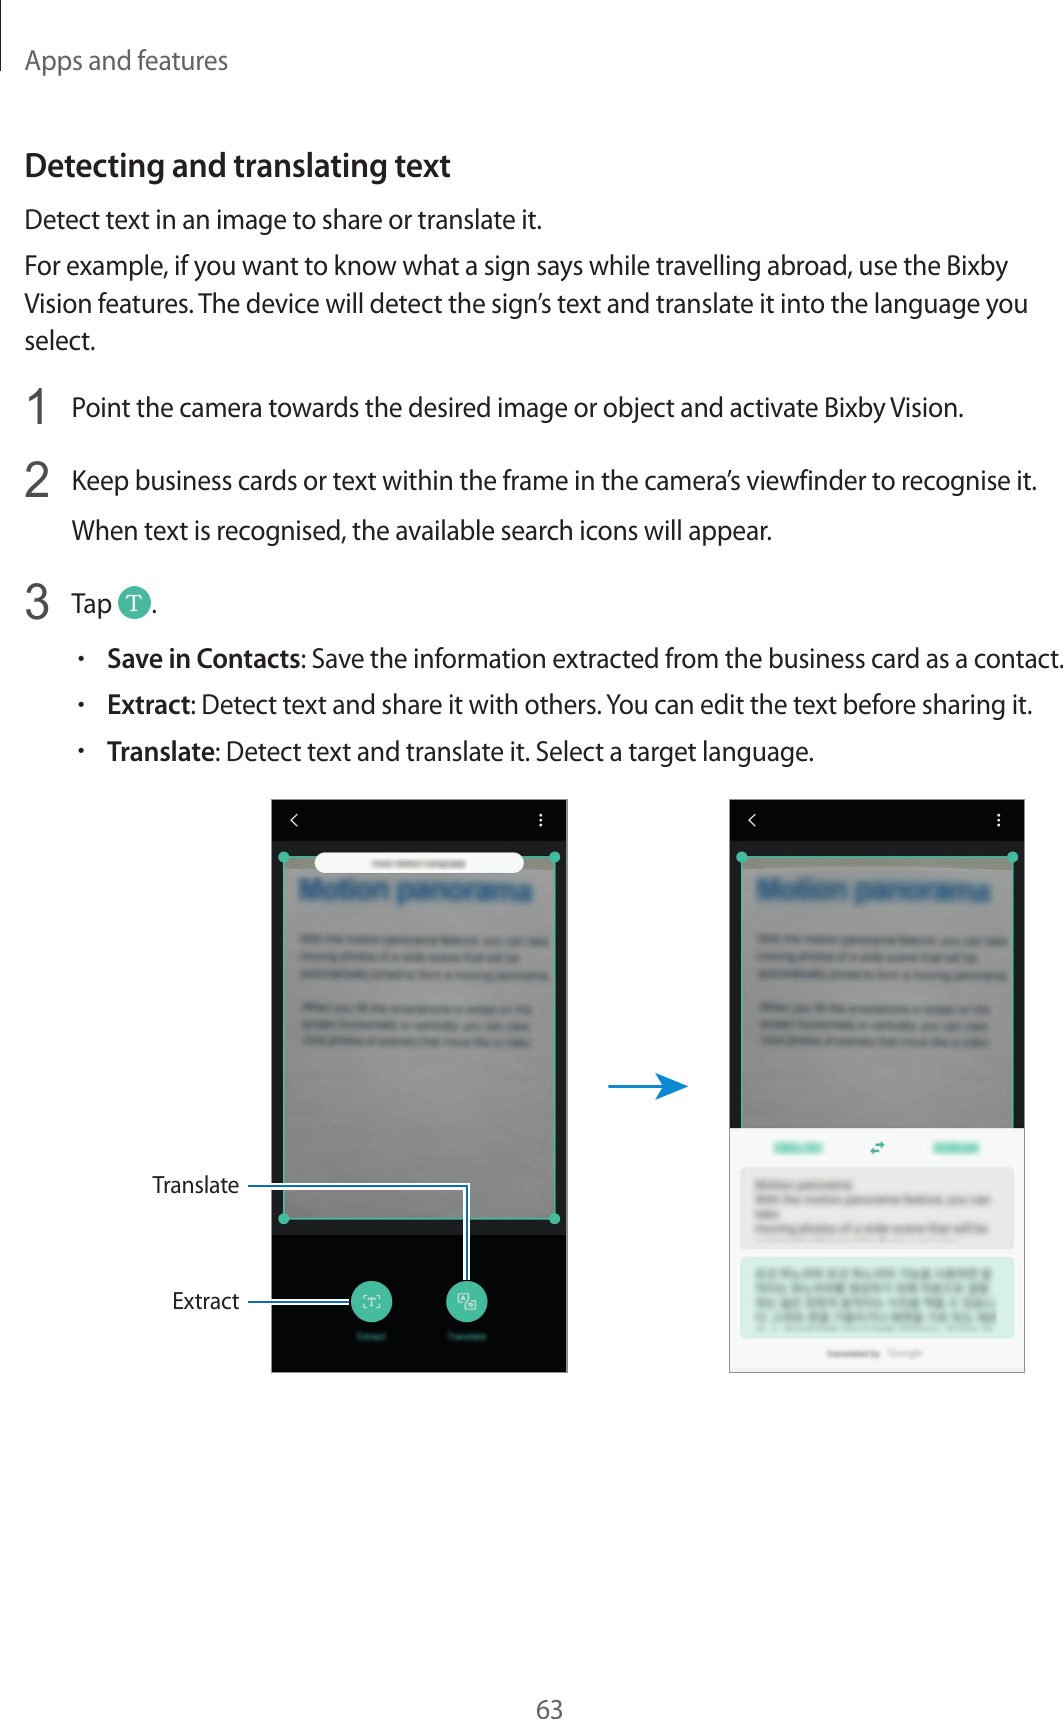 Apps and features63Detecting and translating textDetect text in an image to share or translate it.For example, if you want to know what a sign says while travelling abroad, use the Bixby Vision features. The device will detect the sign’s text and translate it into the language you select.1  Point the camera towards the desired image or object and activate Bixby Vision.2  Keep business cards or text within the frame in the camera’s viewfinder to recognise it.When text is recognised, the available search icons will appear.3  Tap  .•Save in Contacts: Save the information extracted from the business card as a contact.•Extract: Detect text and share it with others. You can edit the text before sharing it.•Translate: Detect text and translate it. Select a target language.ExtractTranslate